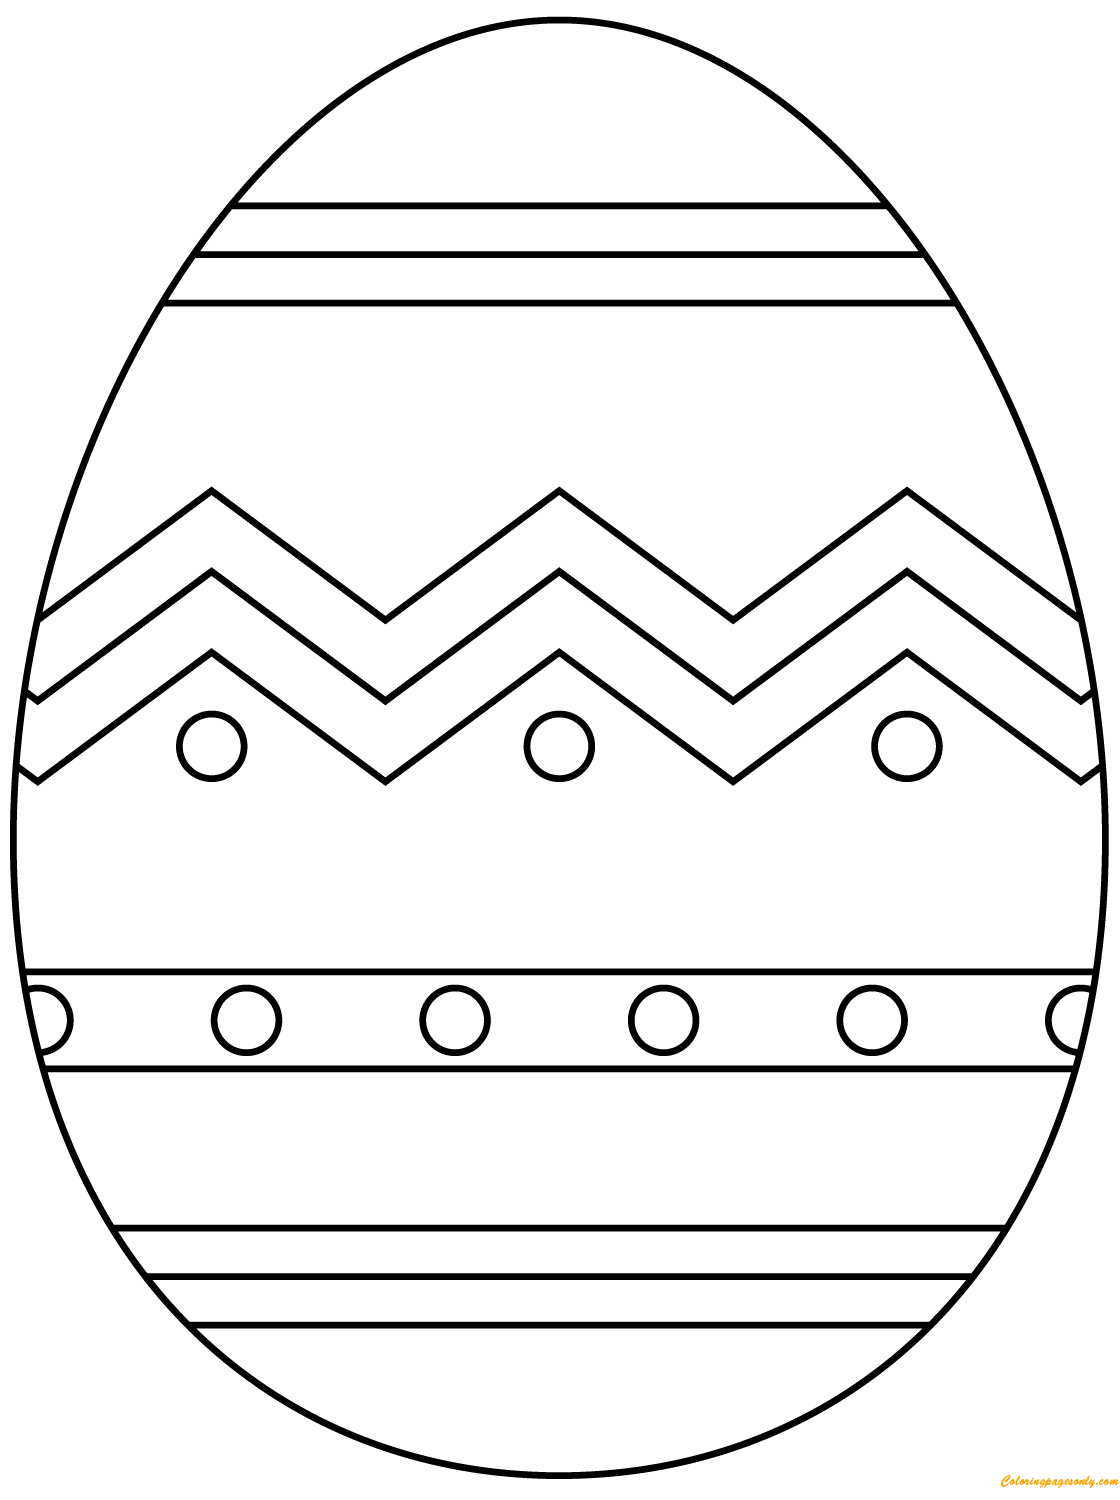 coloring-pages-easter-eggs-printable